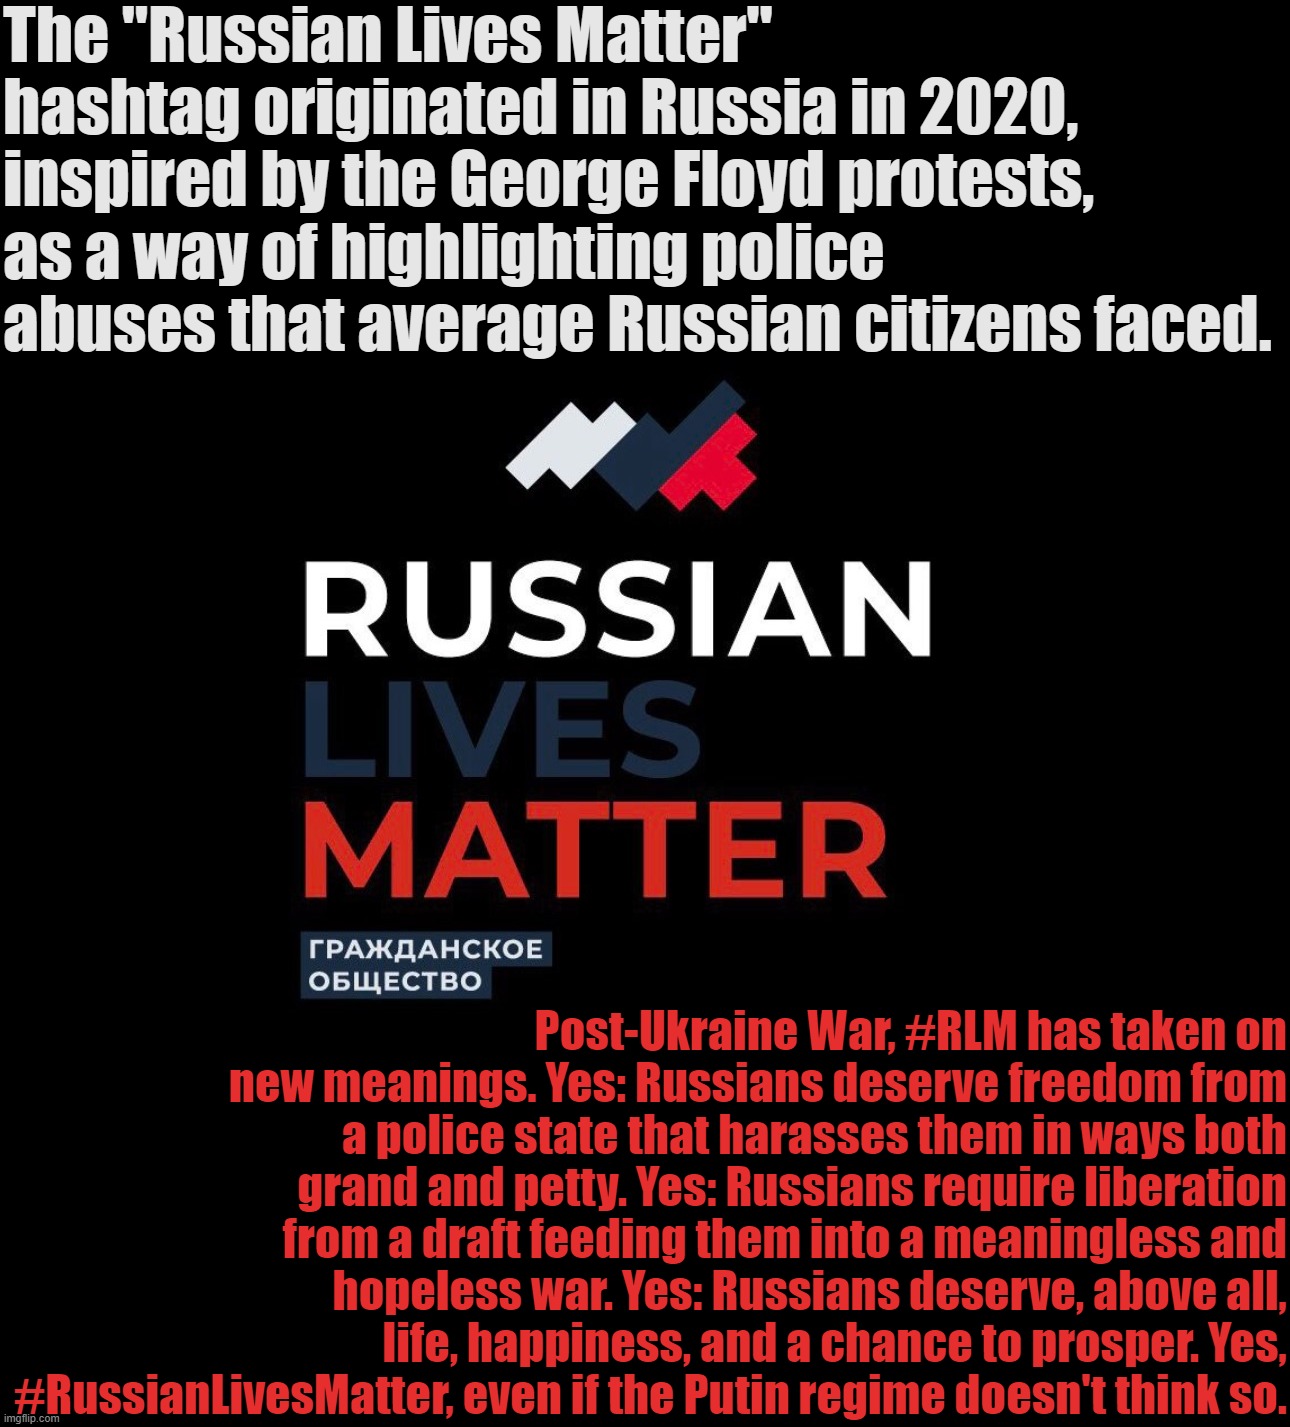 History and evolution of Russian Lives Matter. | The "Russian Lives Matter" hashtag originated in Russia in 2020, inspired by the George Floyd protests, as a way of highlighting police abuses that average Russian citizens faced. Post-Ukraine War, #RLM has taken on new meanings. Yes: Russians deserve freedom from a police state that harasses them in ways both grand and petty. Yes: Russians require liberation from a draft feeding them into a meaningless and hopeless war. Yes: Russians deserve, above all, life, happiness, and a chance to prosper. Yes, #RussianLivesMatter, even if the Putin regime doesn't think so. | image tagged in russian lives matter,rlm,russian,lives,matter,russia | made w/ Imgflip meme maker